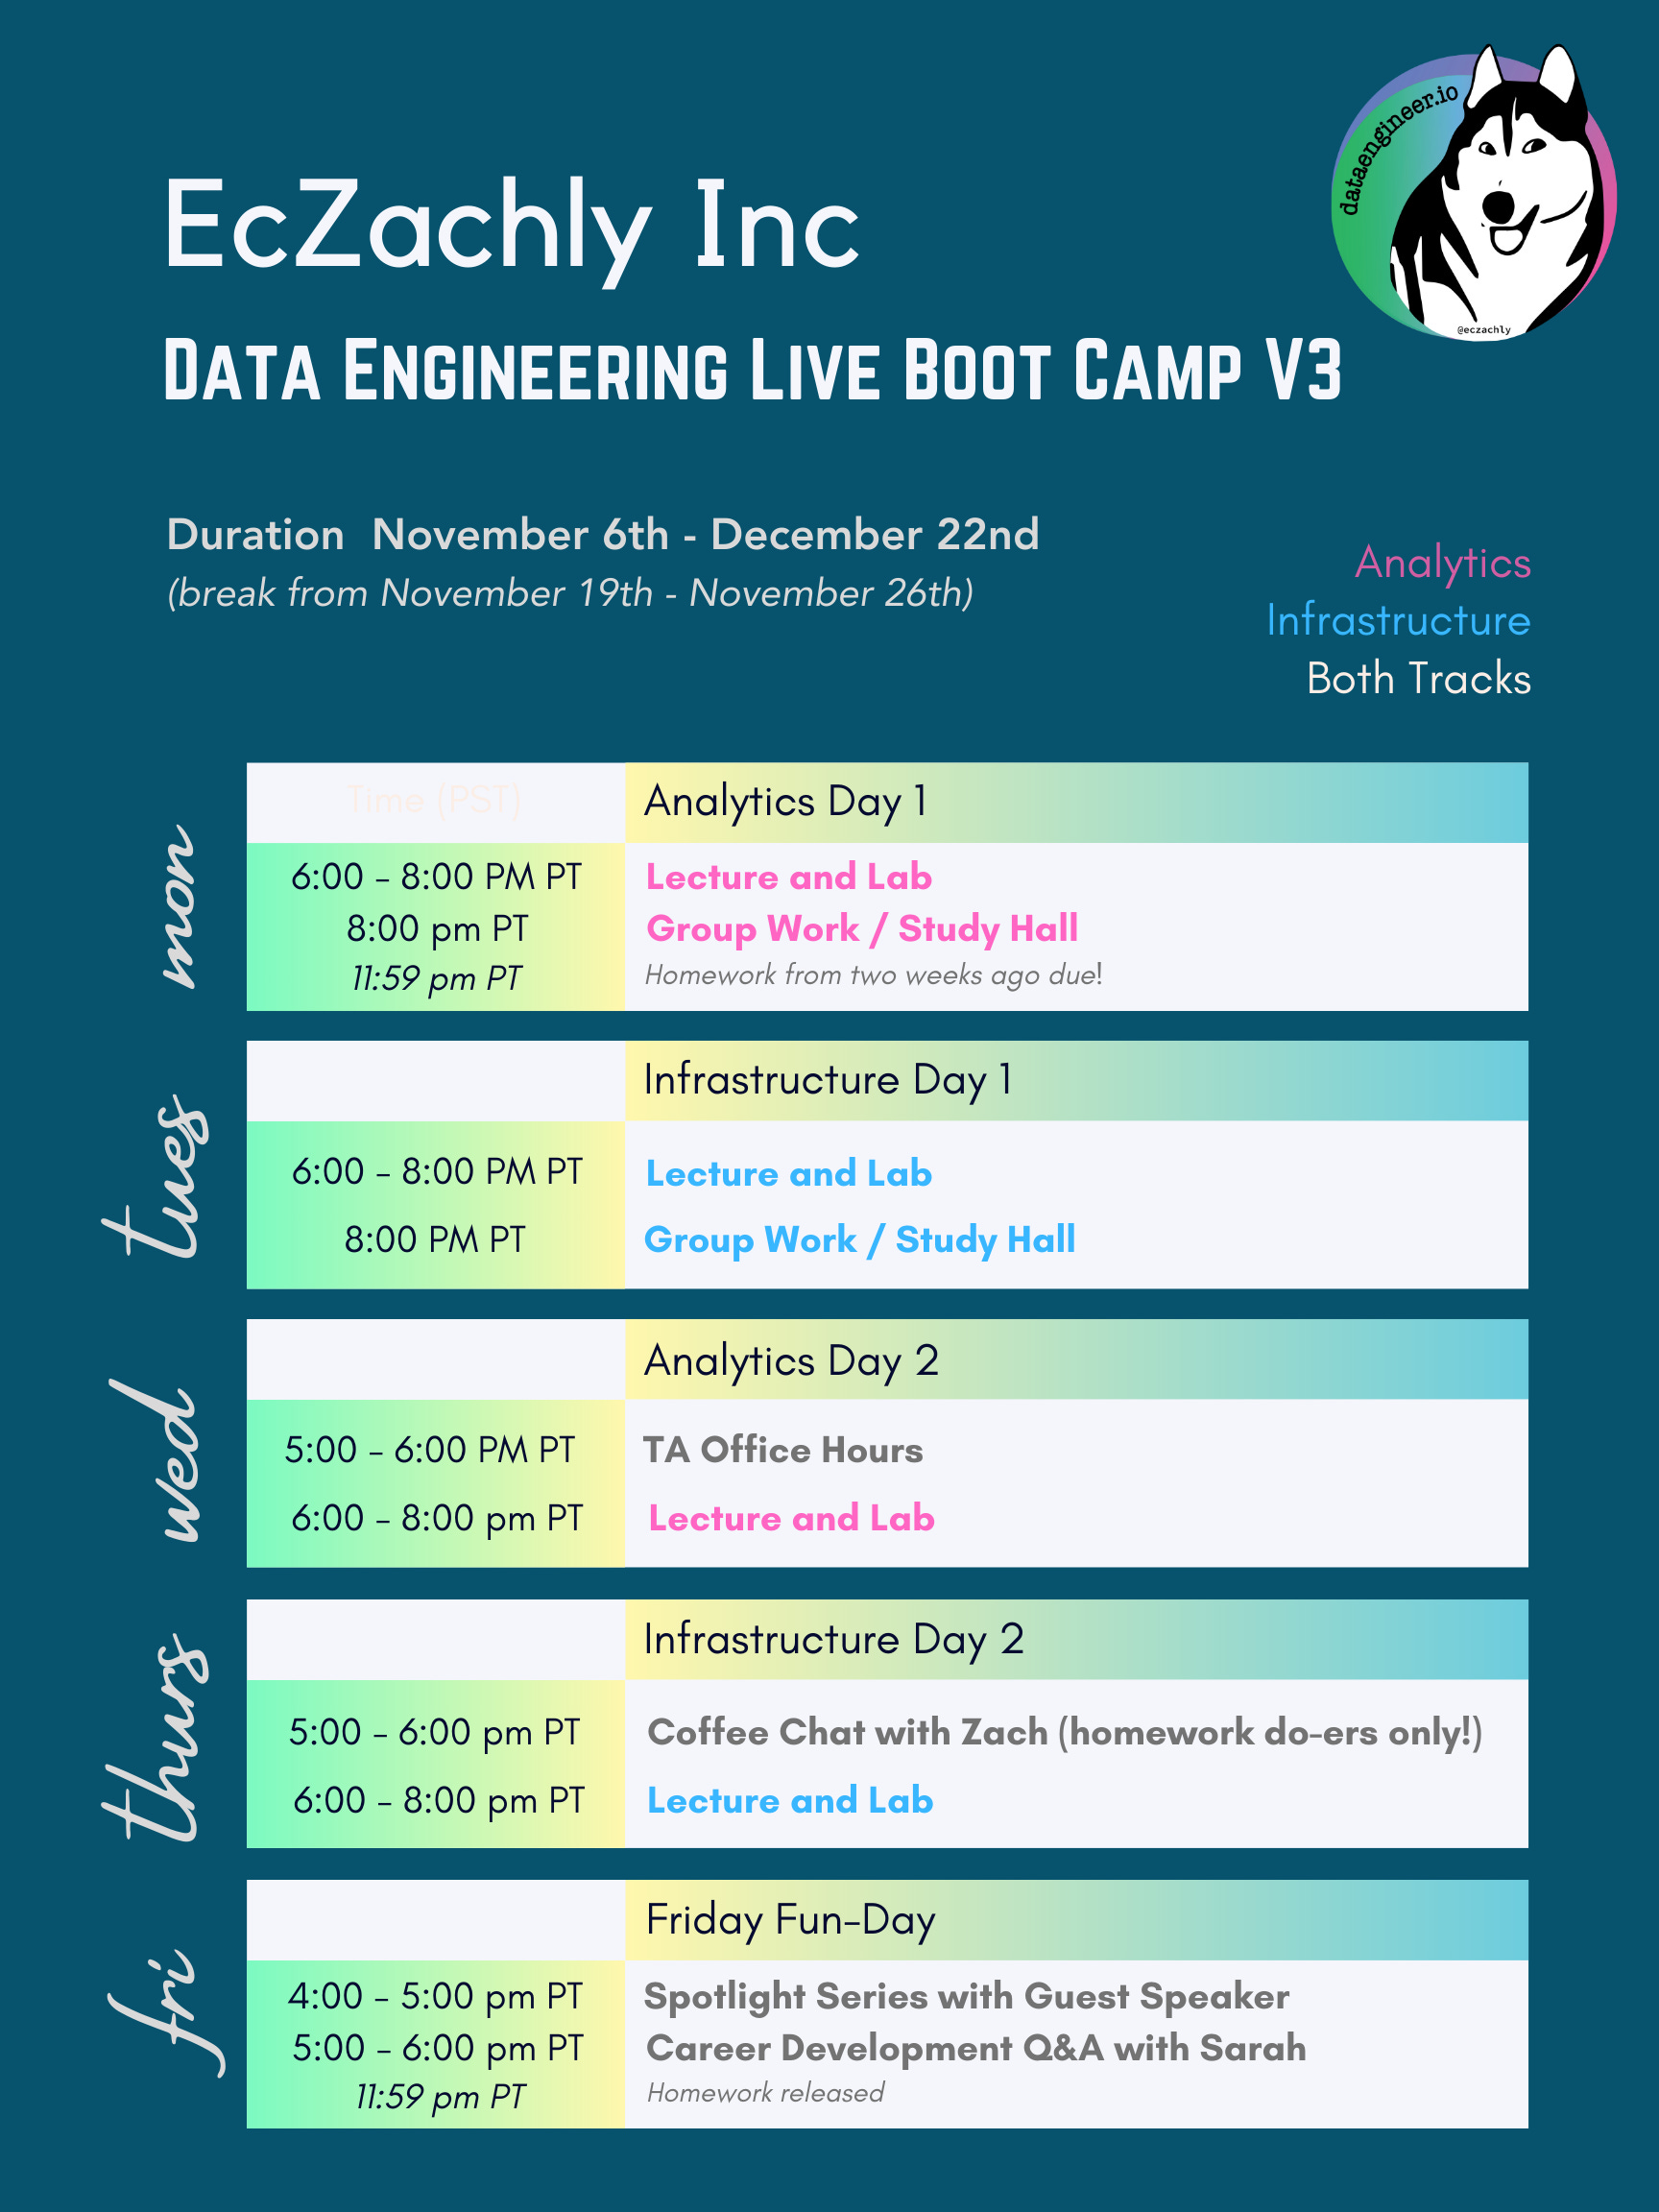 How to enroll in EcZachly/DataEngineer.io V3 November 6th data